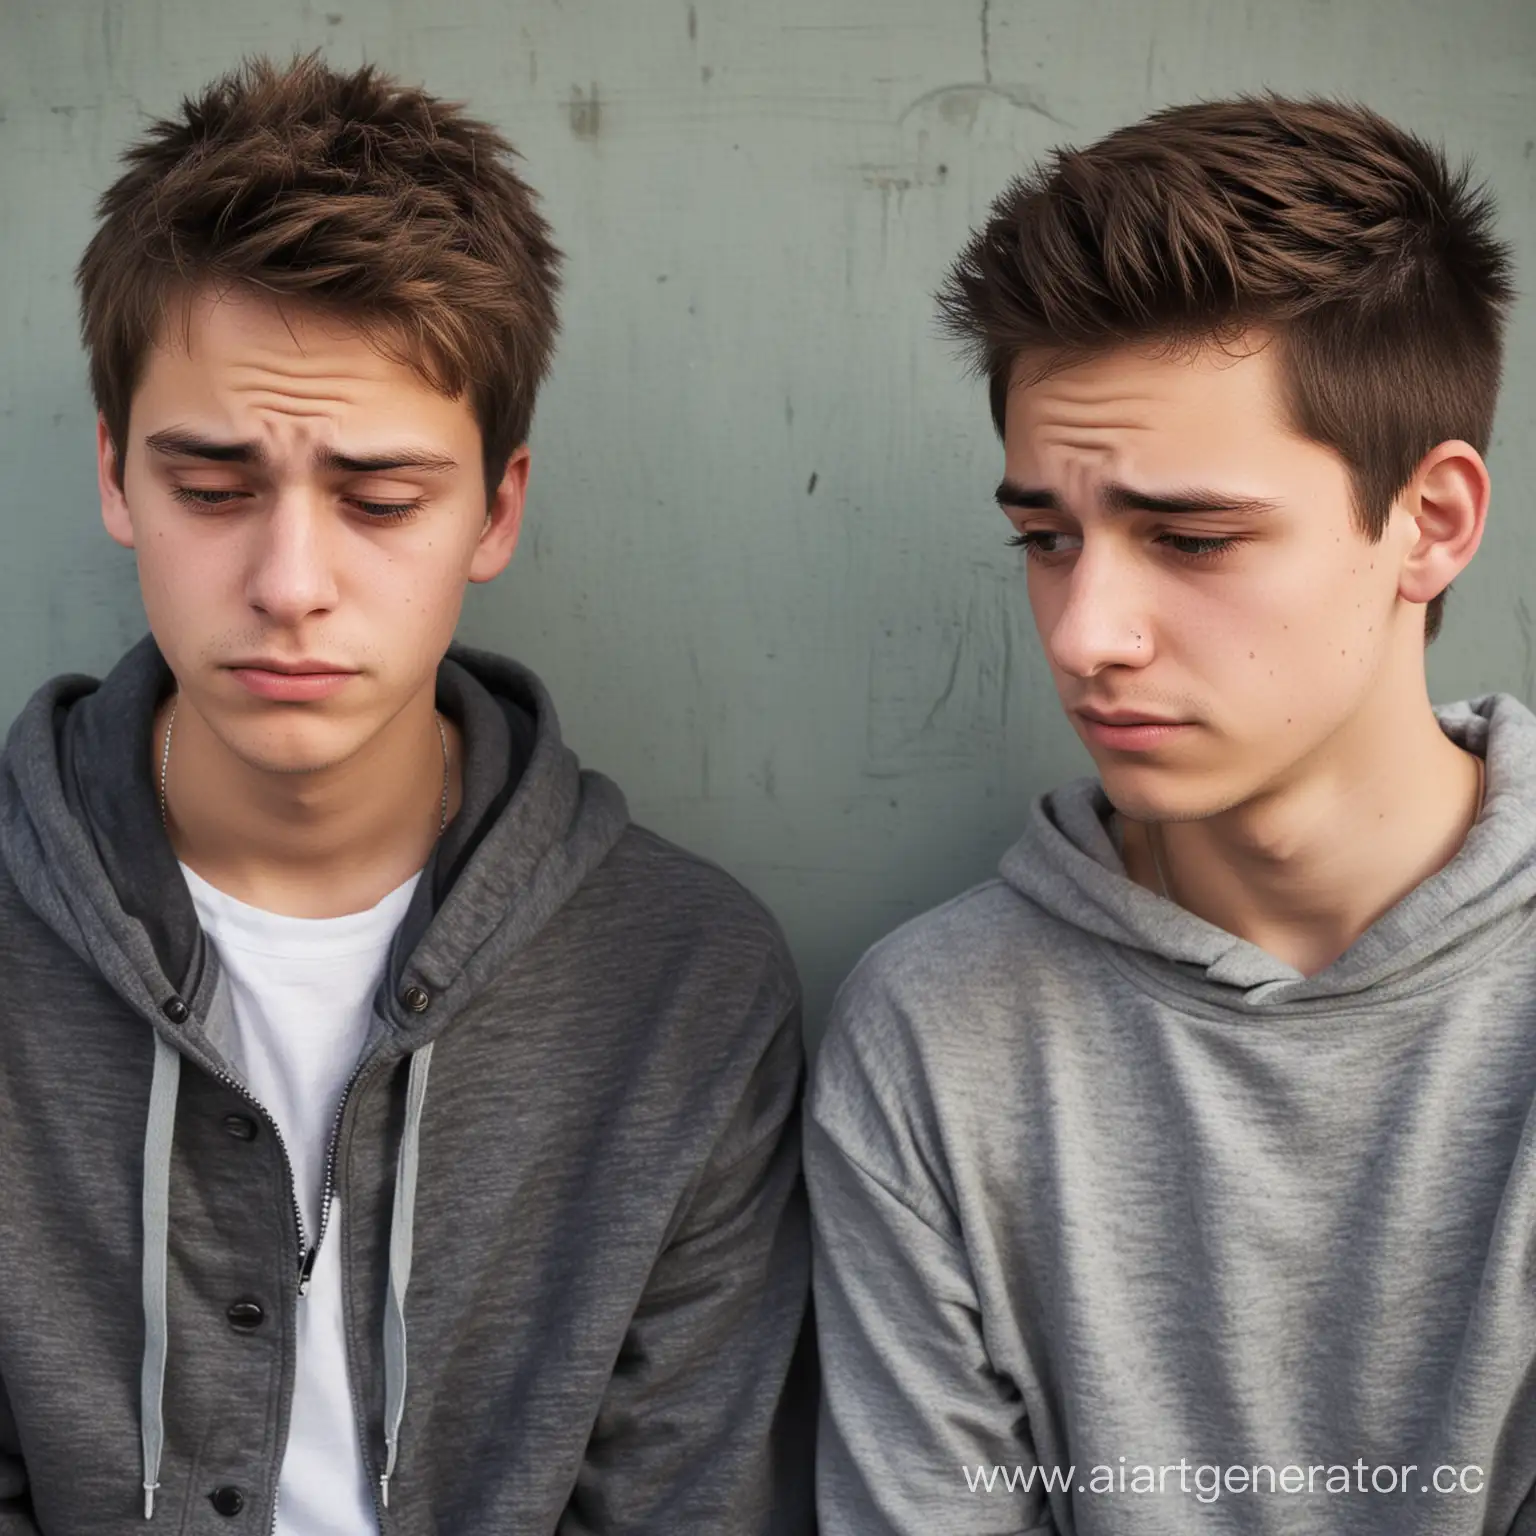 Teenagers-Discussing-Feelings-of-Sadness